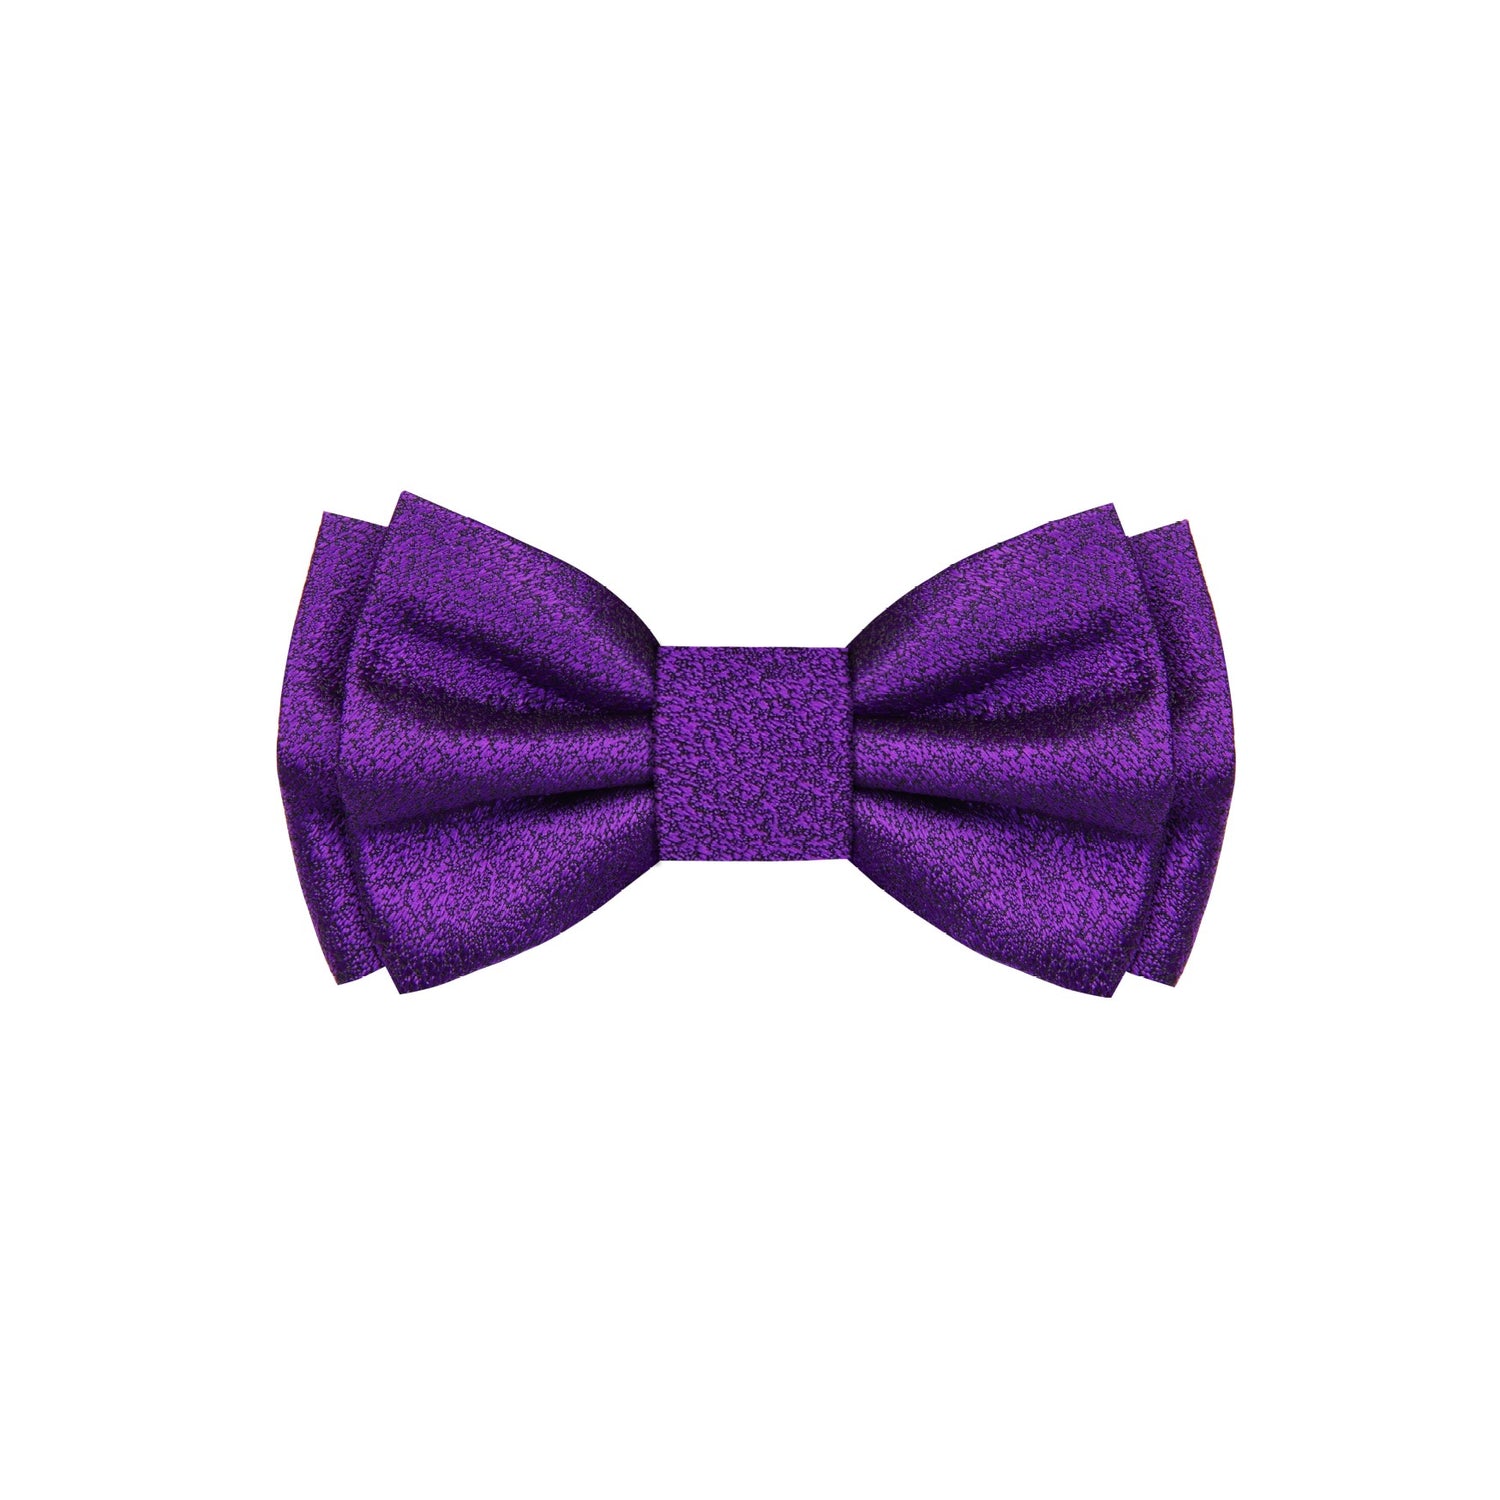 Solid Deep Purple With Texture Bow Tie 